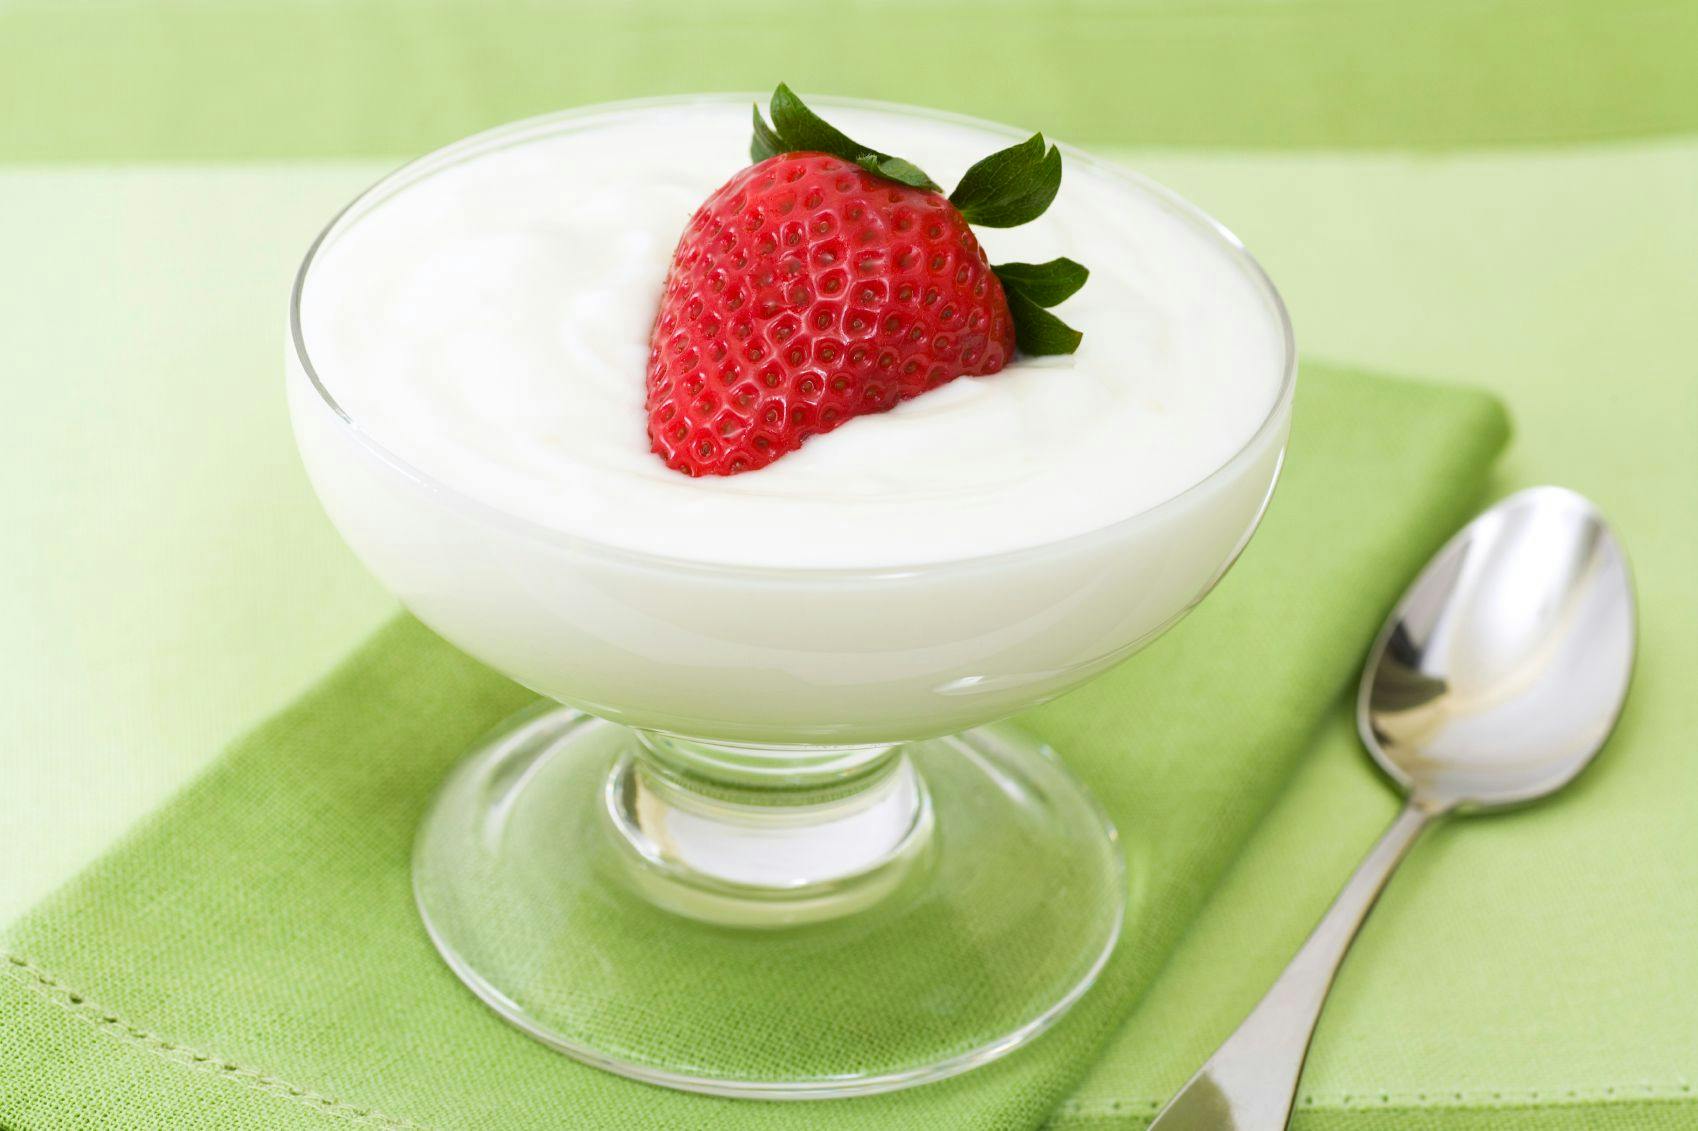 Flavor Drives Yogurt Trends, Consumer Preferences, Market Research Study Finds 